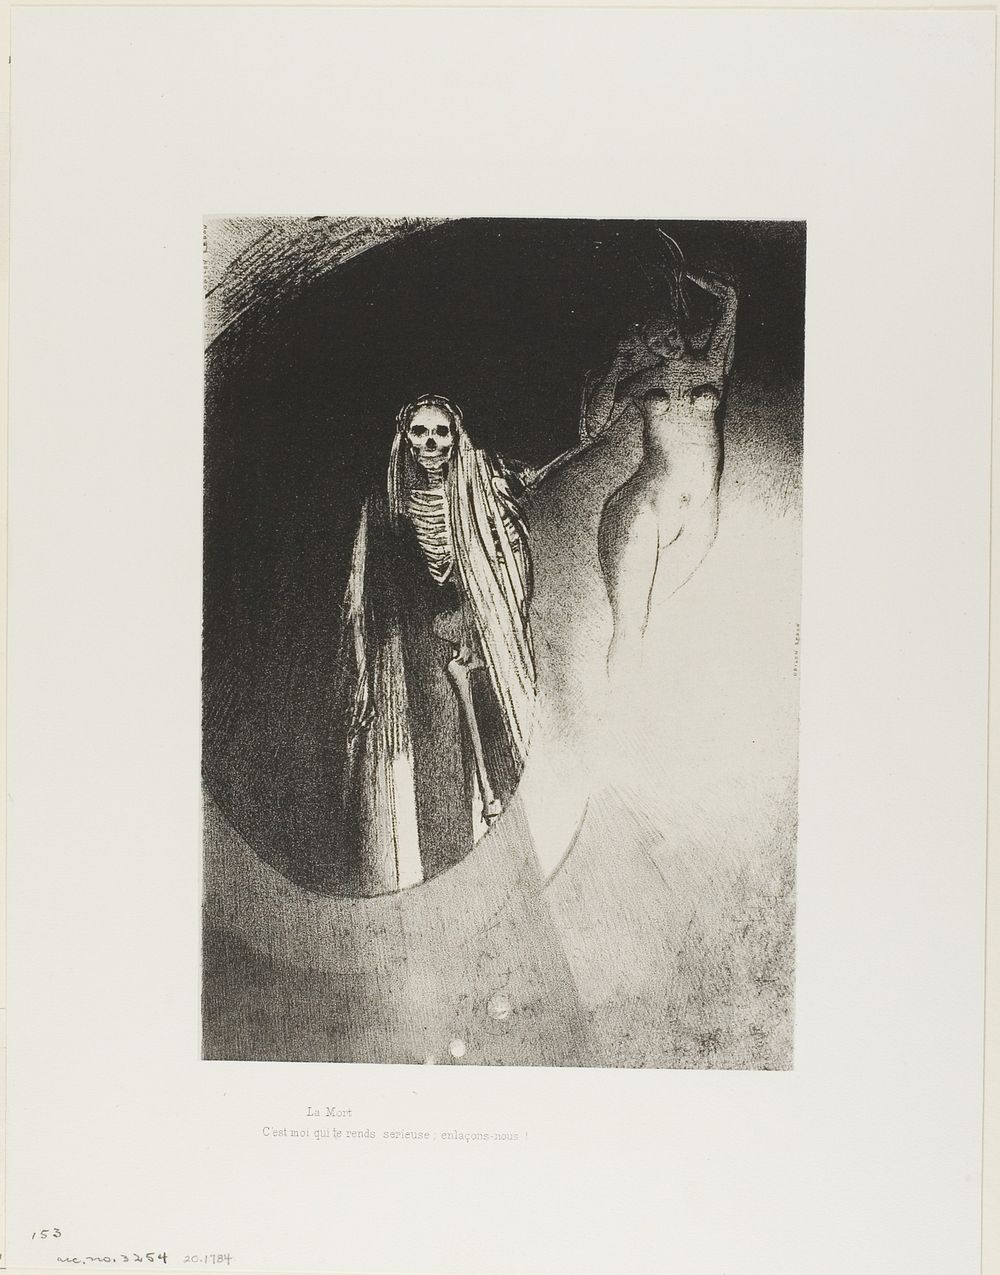 Death: "It is I who make you serious; let us embrace each other", plate 20 of 24 by Odilon Redon